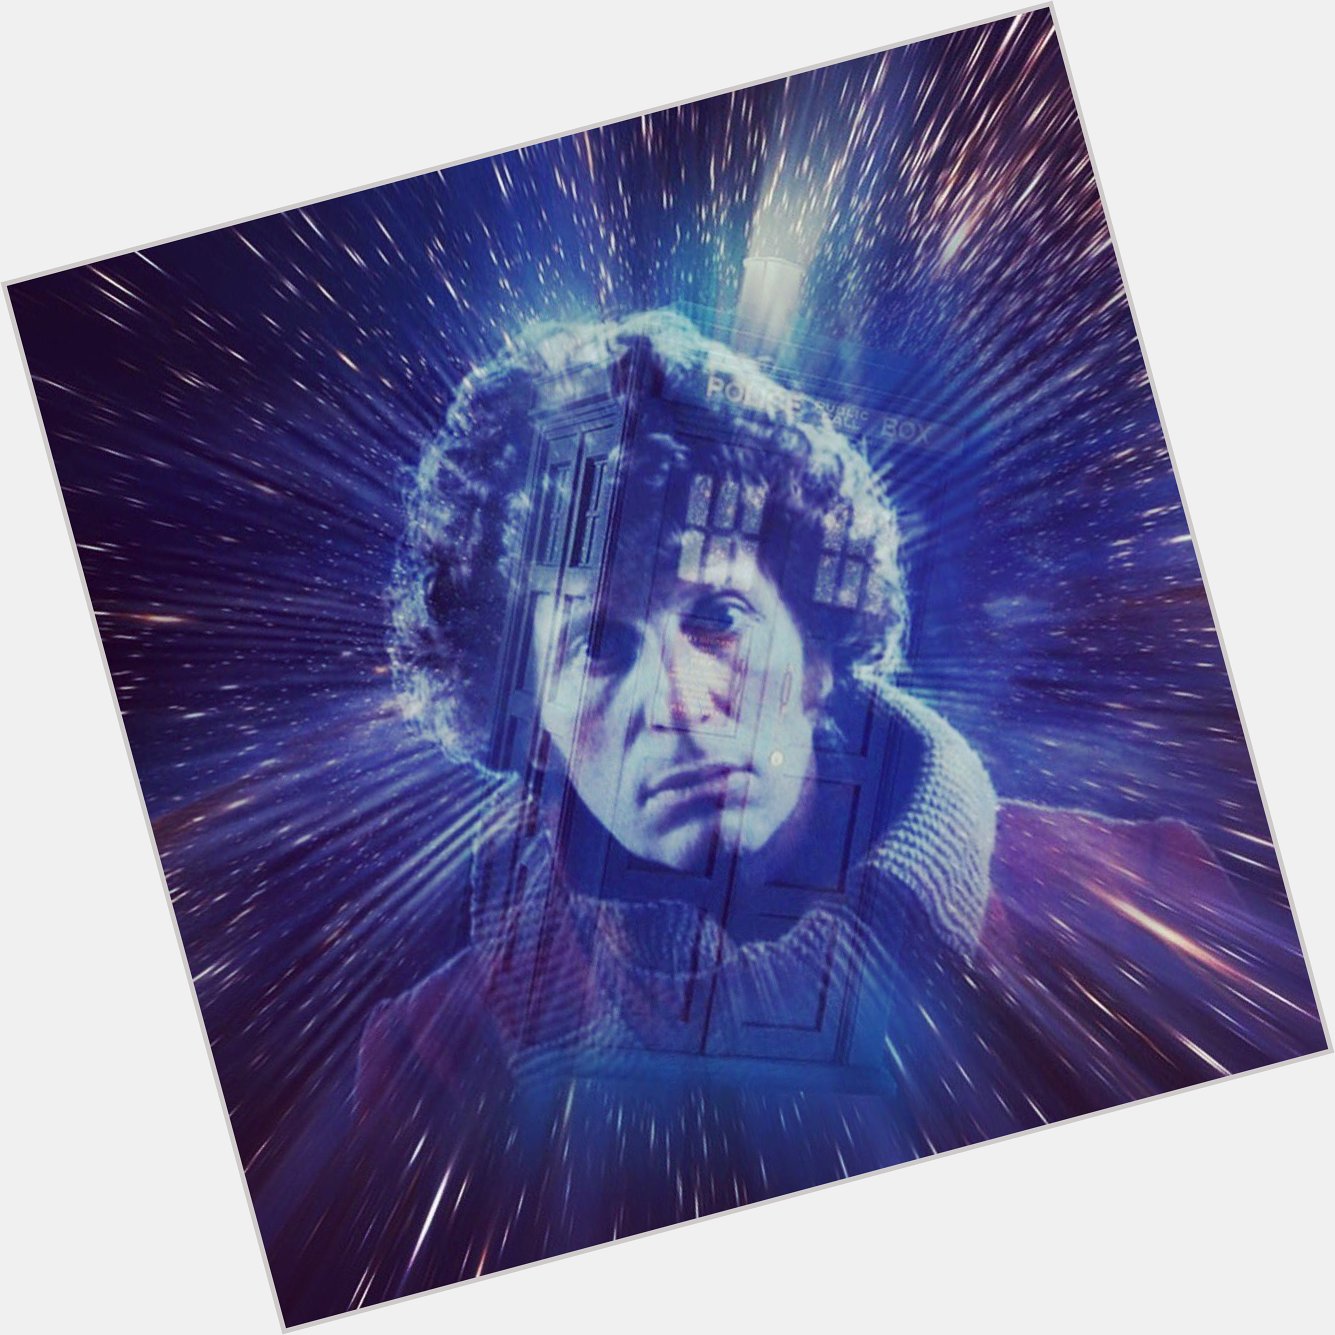 Happy Birthday to Tom Baker the Fourth Doctor!  